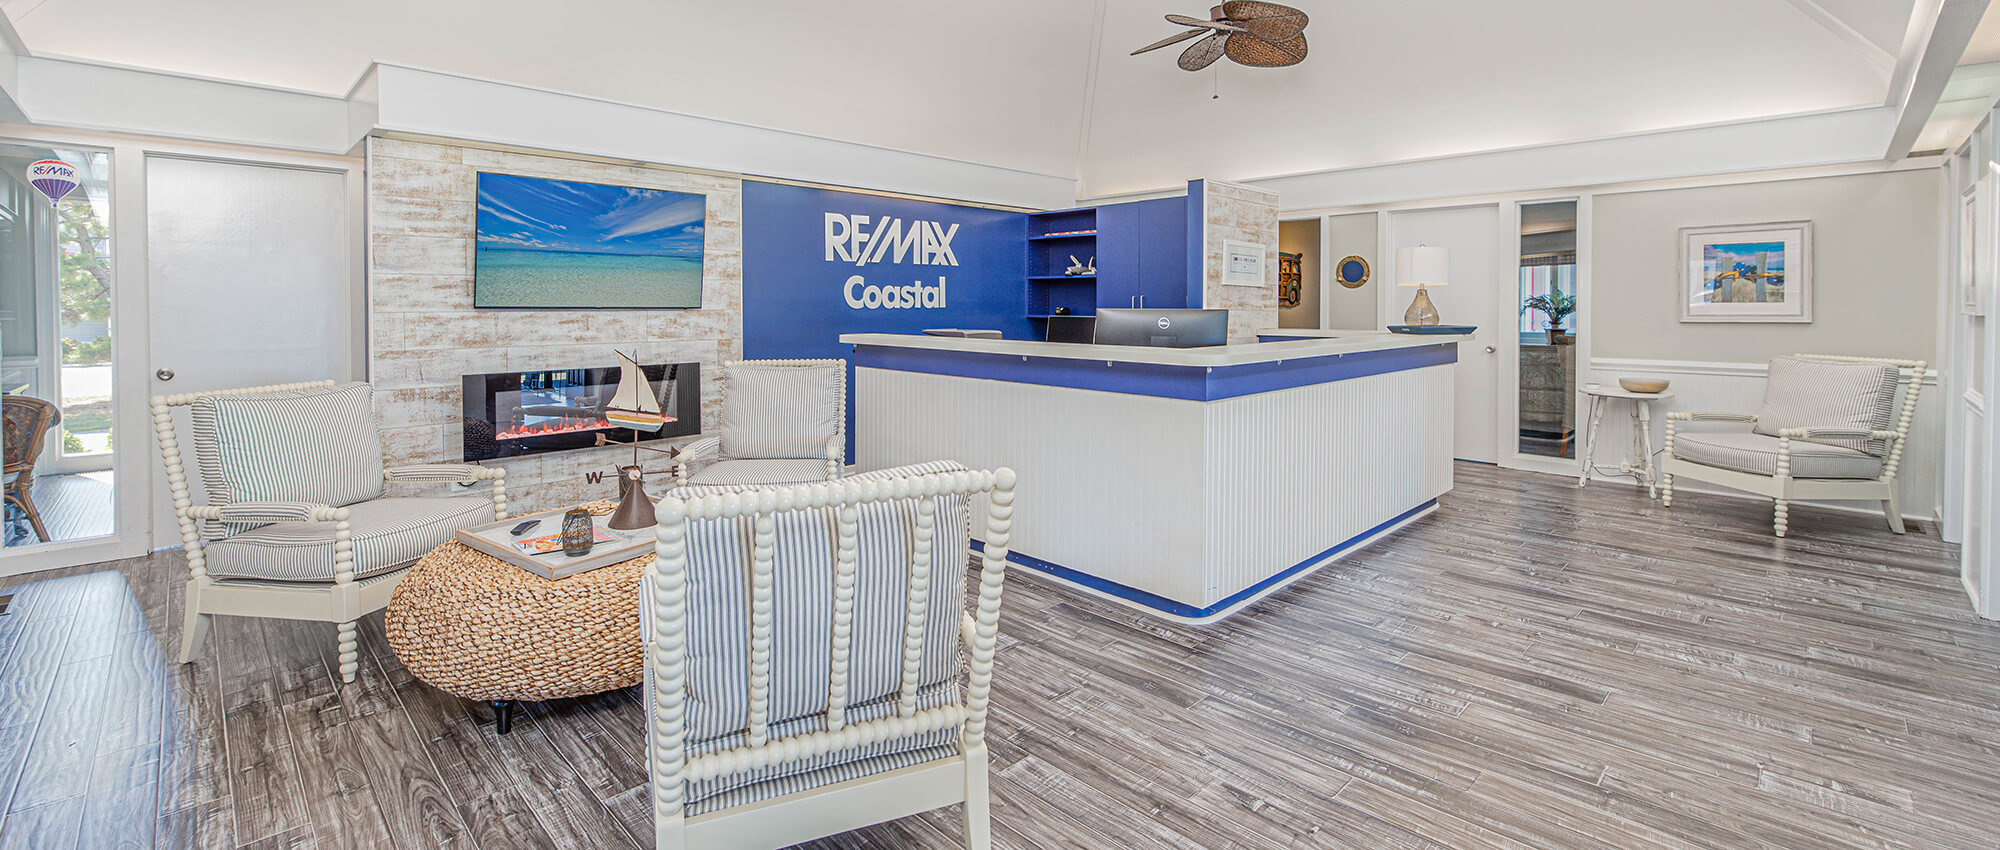 196_costal-remax-office03 Find Your Dream Home | Beach Real Estate Made Easy